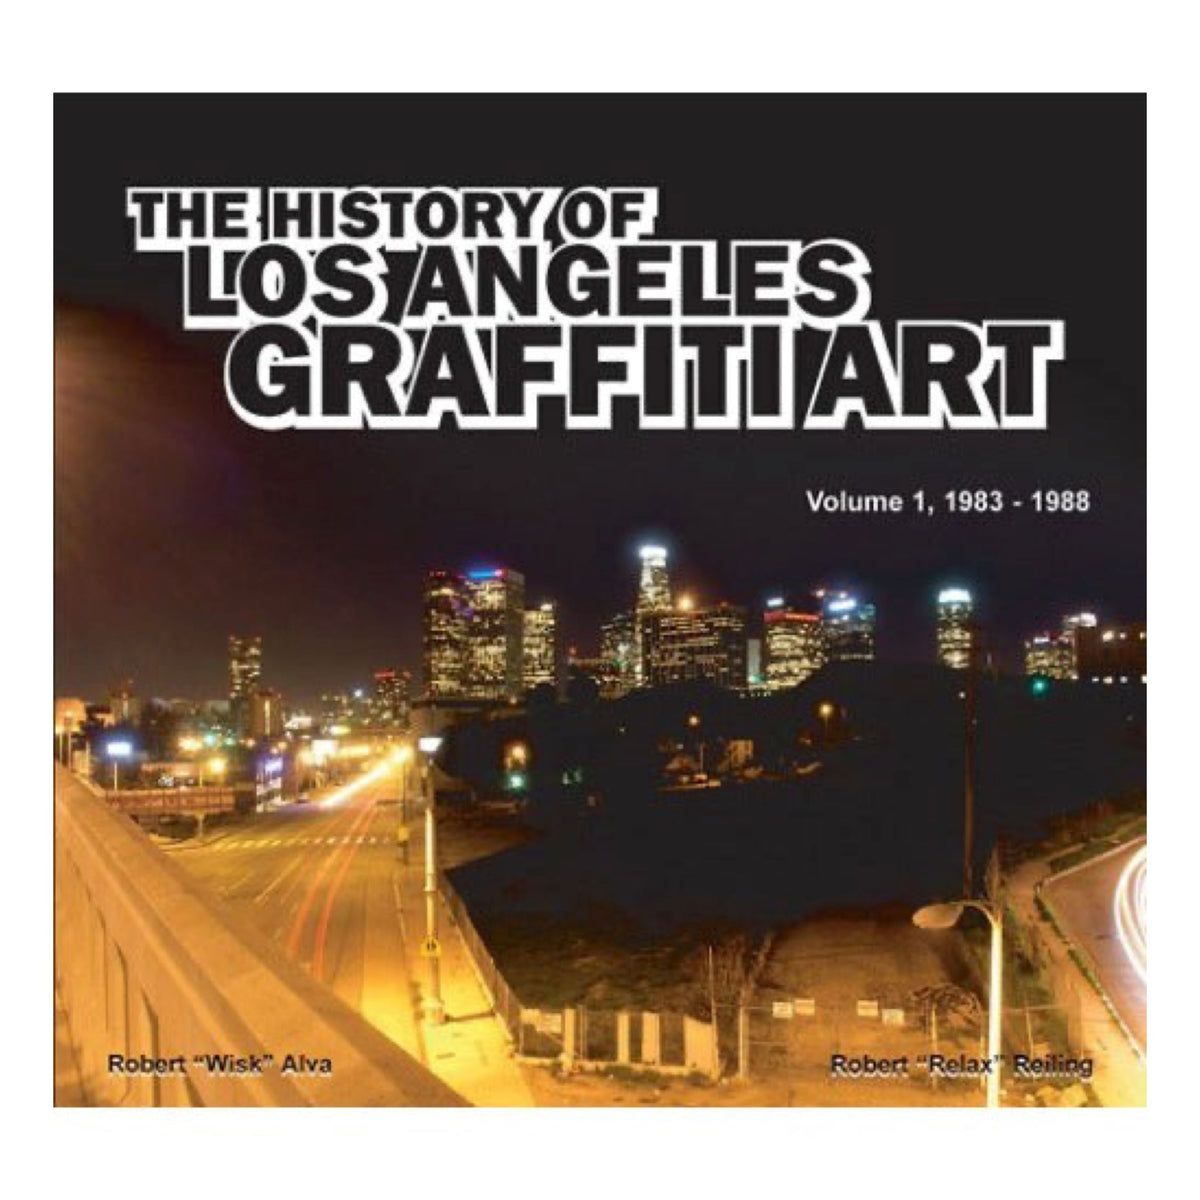 The History of Los Angeles Graffiti Art: Volume 1, 1983-1988 - Deluxe